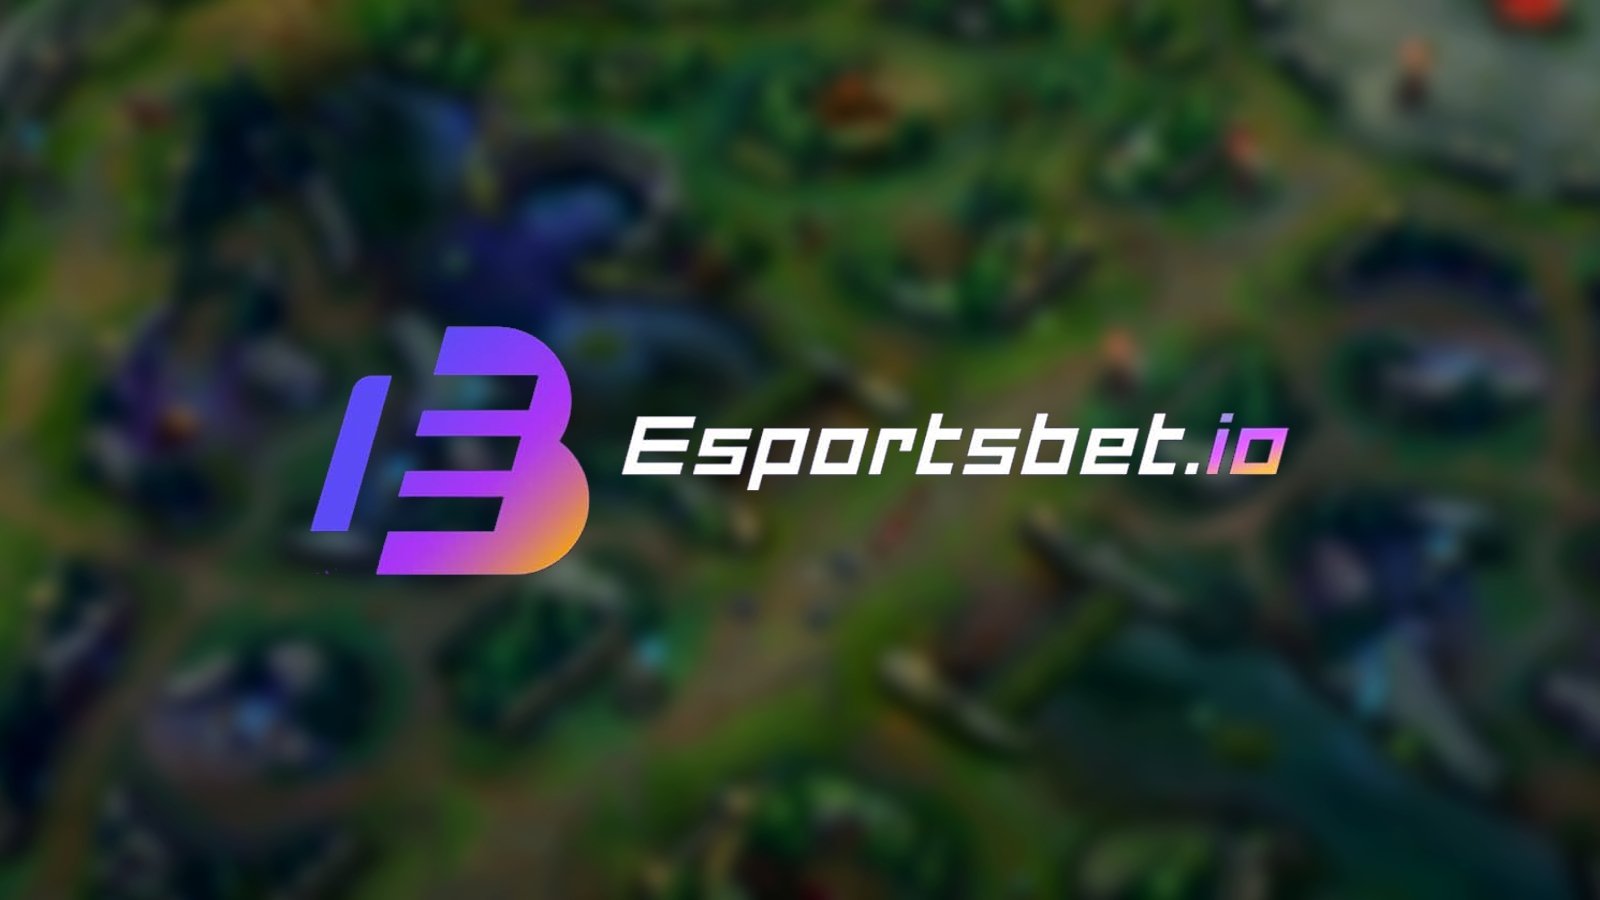 How to find the best esports events and matches to bet on